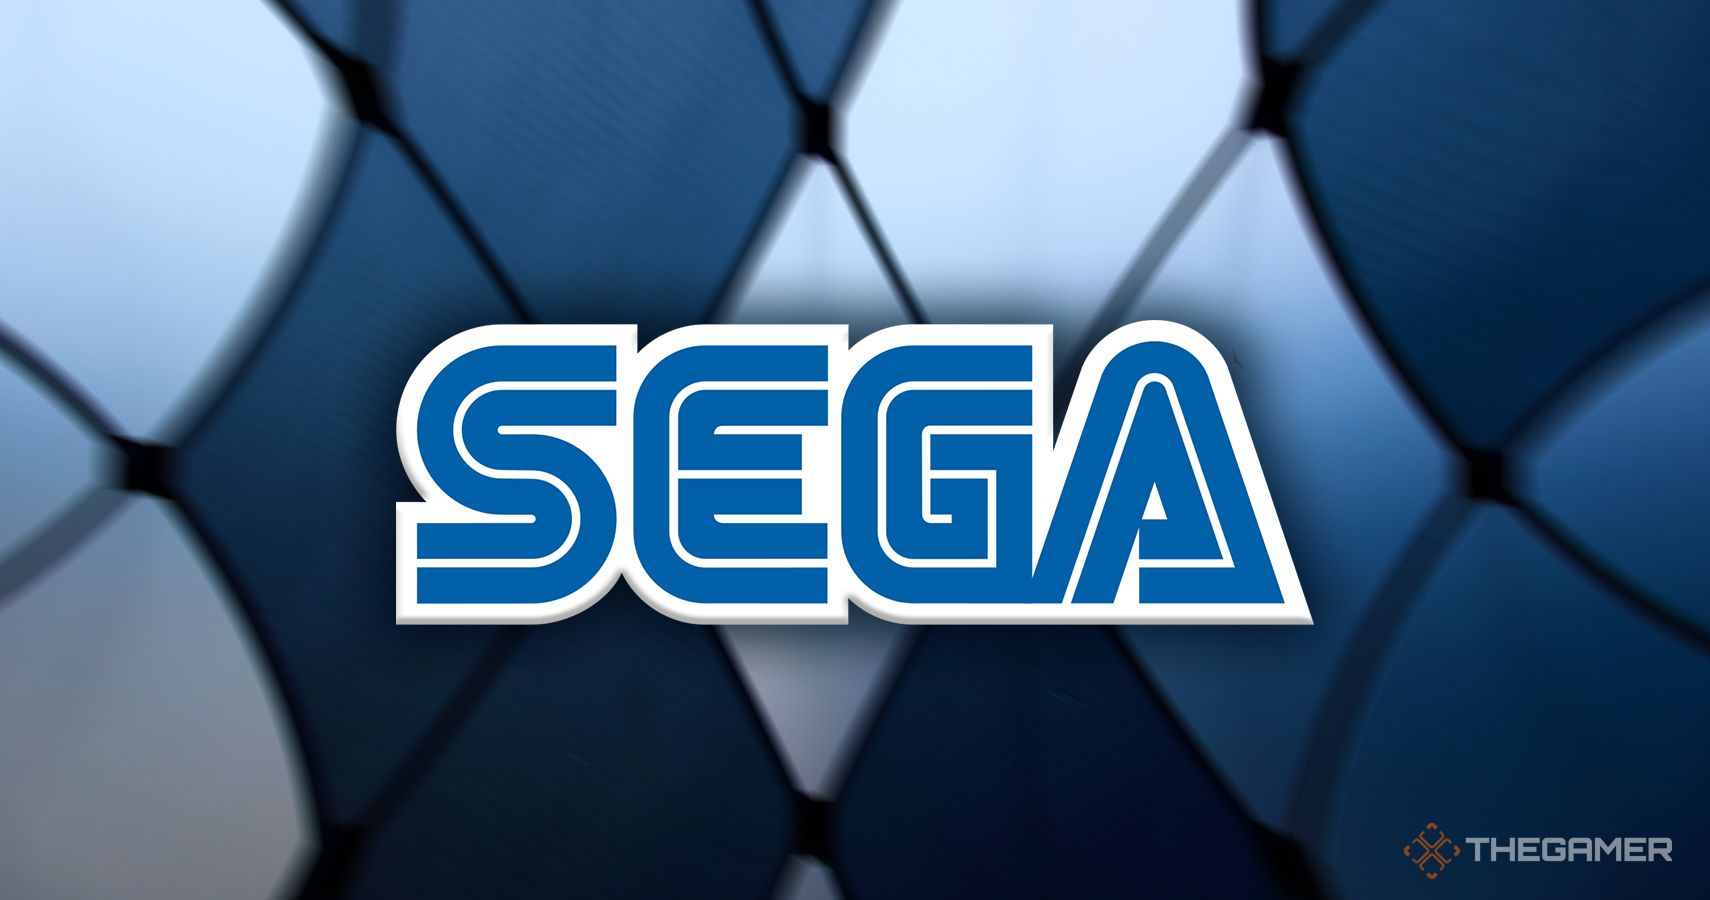 the sega logo on a fabric looking background